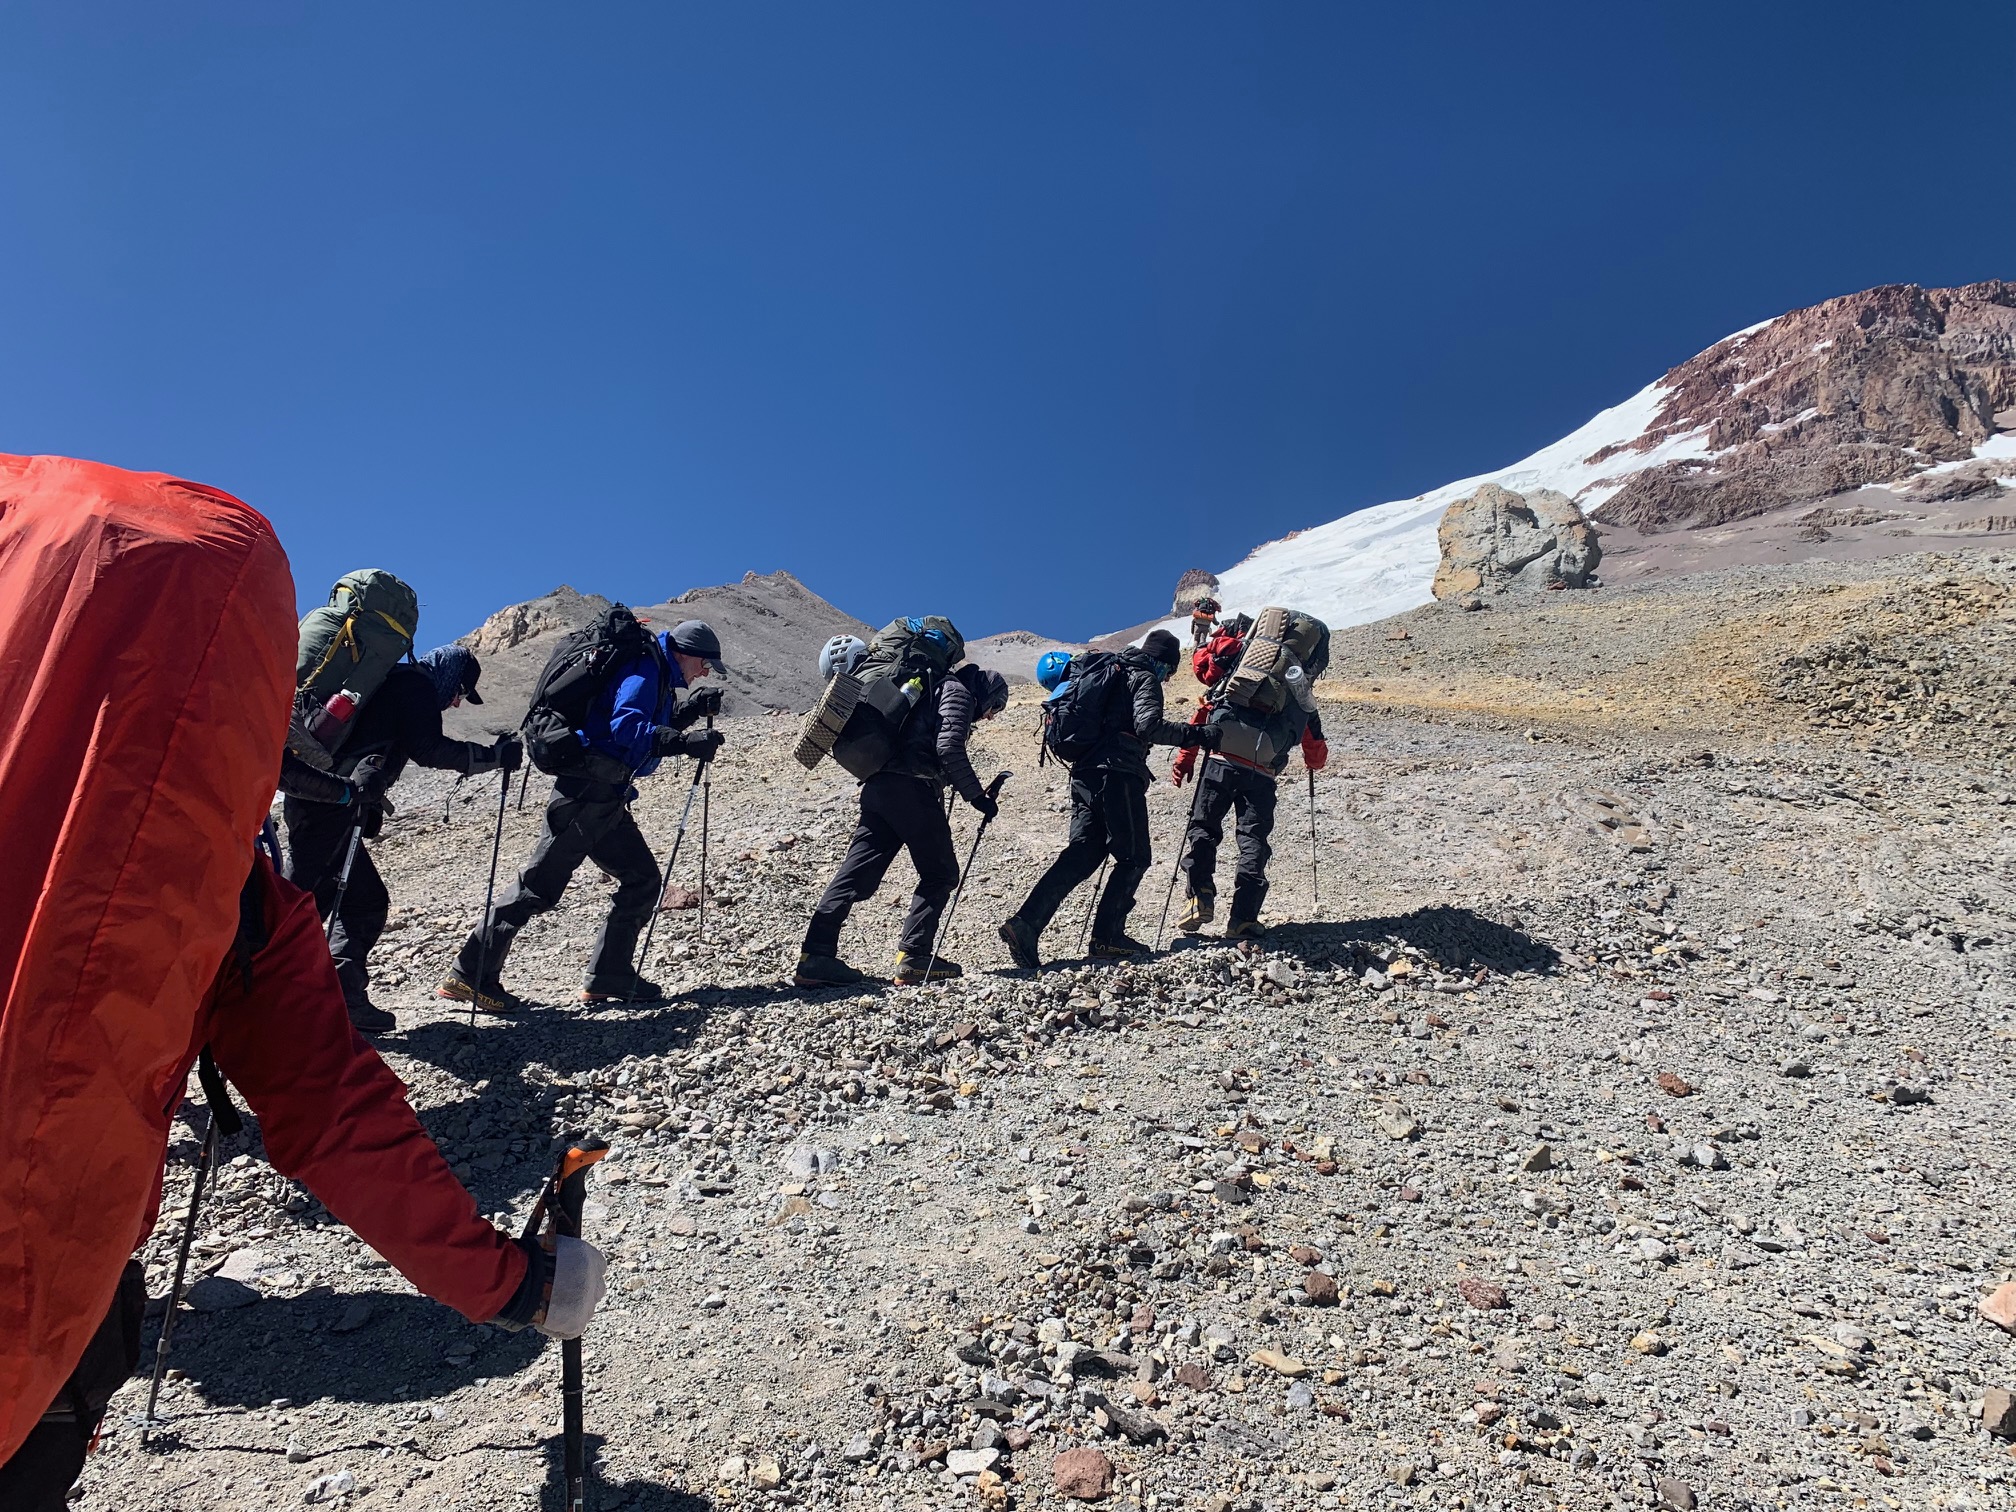 Important things to know about Aconcagua